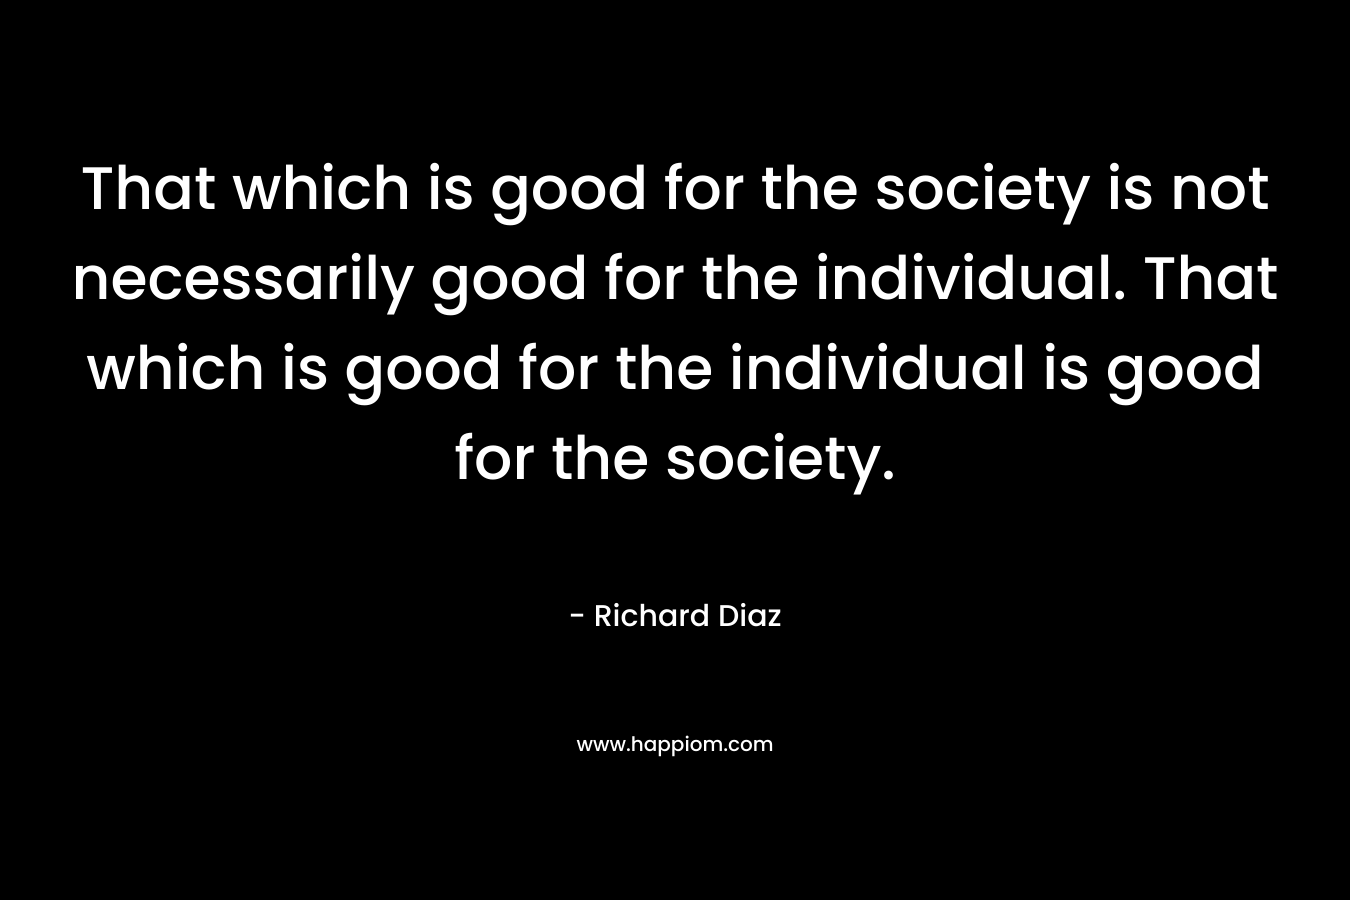 That which is good for the society is not necessarily good for the individual. That which is good for the individual is good for the society.